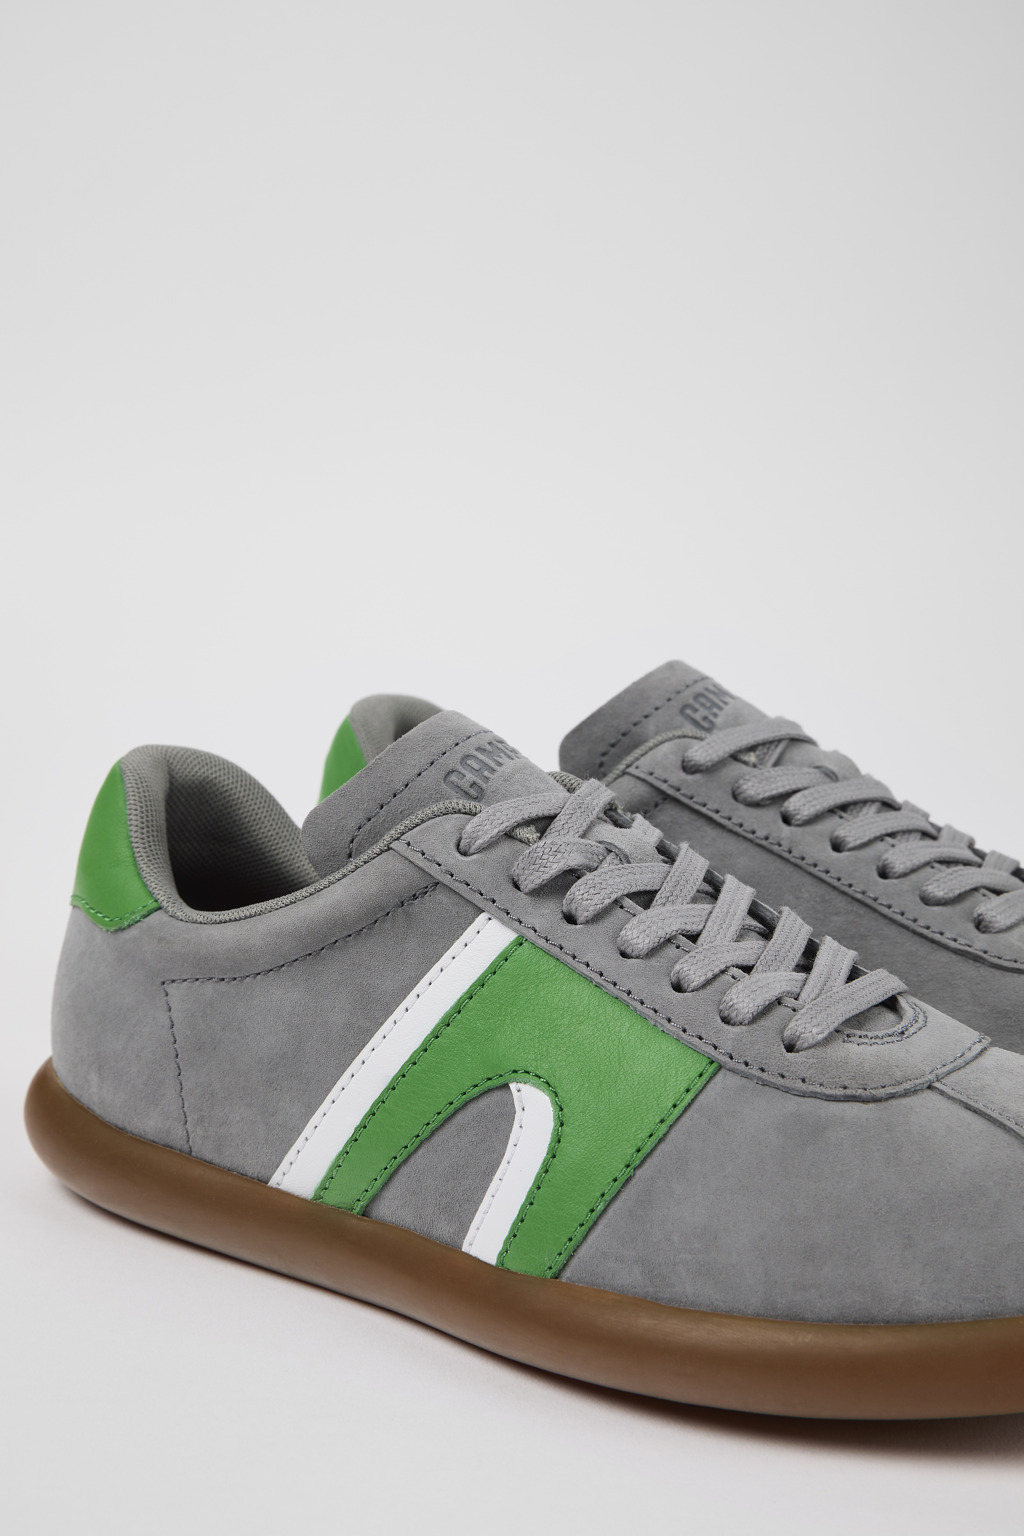 Pelotas Grey Sneakers for Women - Fall/Winter collection - Camper 